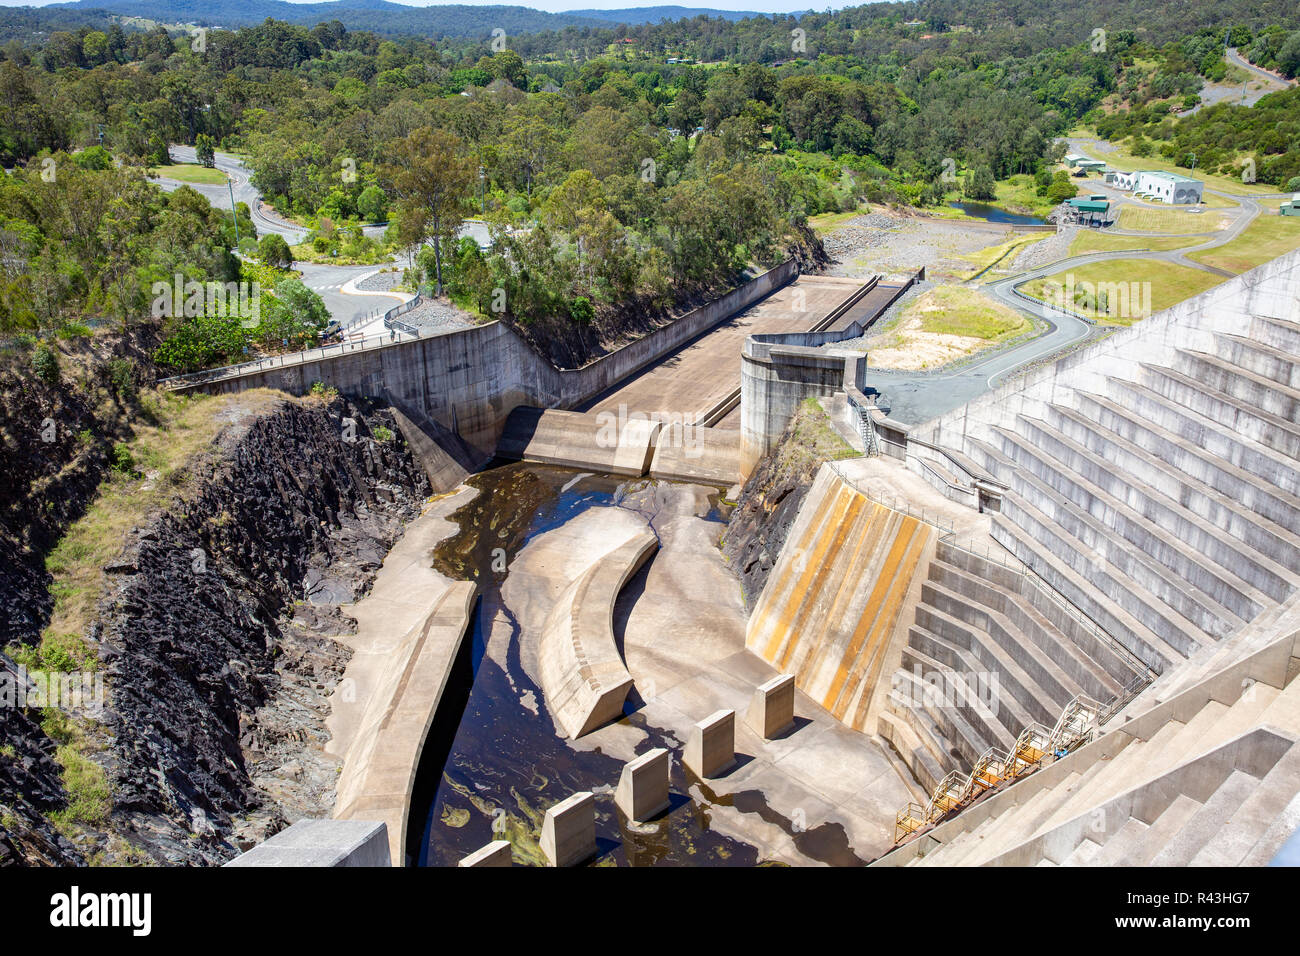 Hinze water dam in the Gold coast hinterland controls potable water supply to Gold coast residents,Queensland,Australia Stock Photo